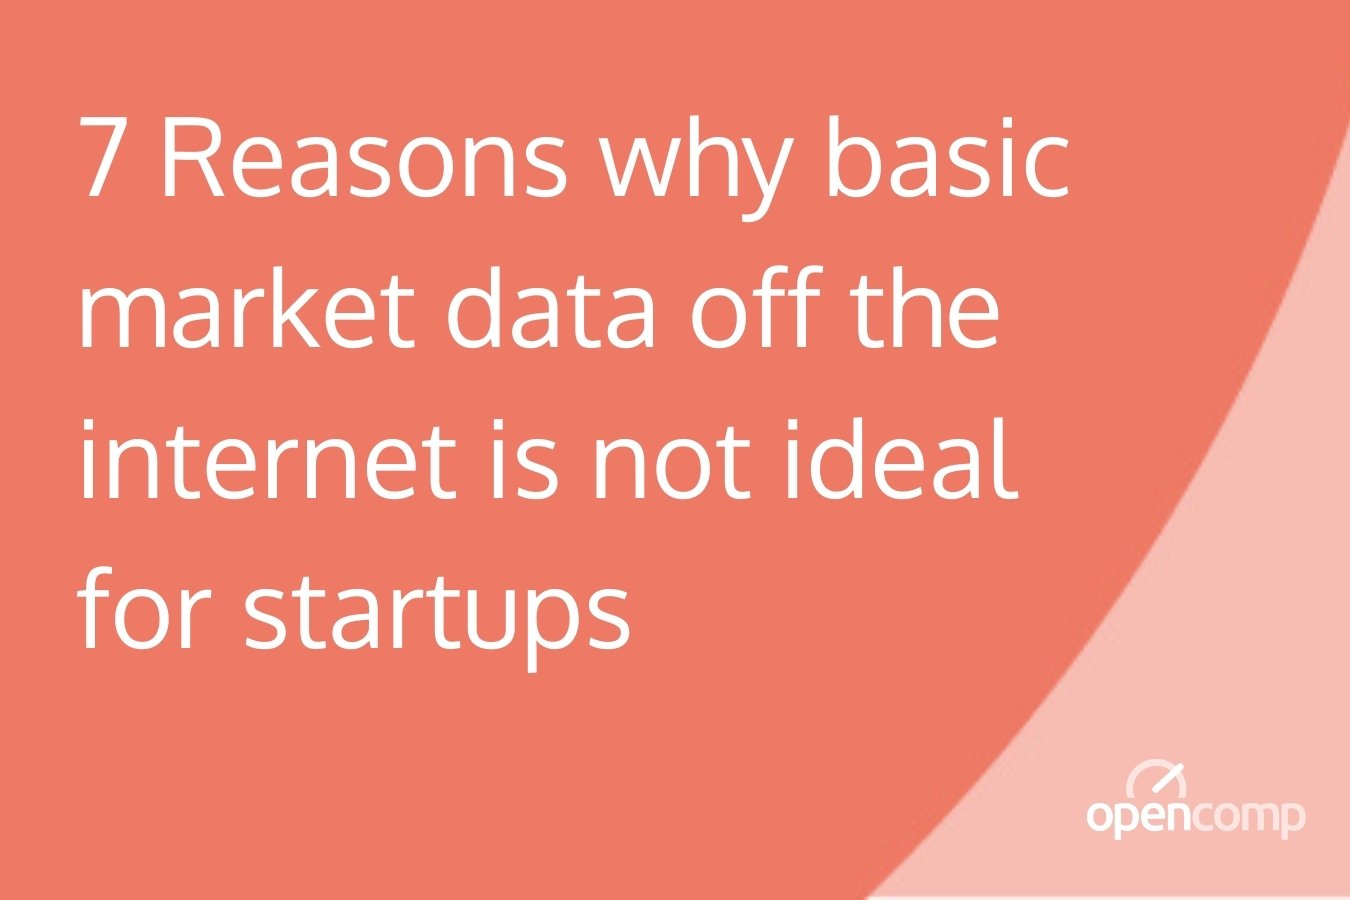 7 Reasons why basic market data off the internet is not ideal for startups-1